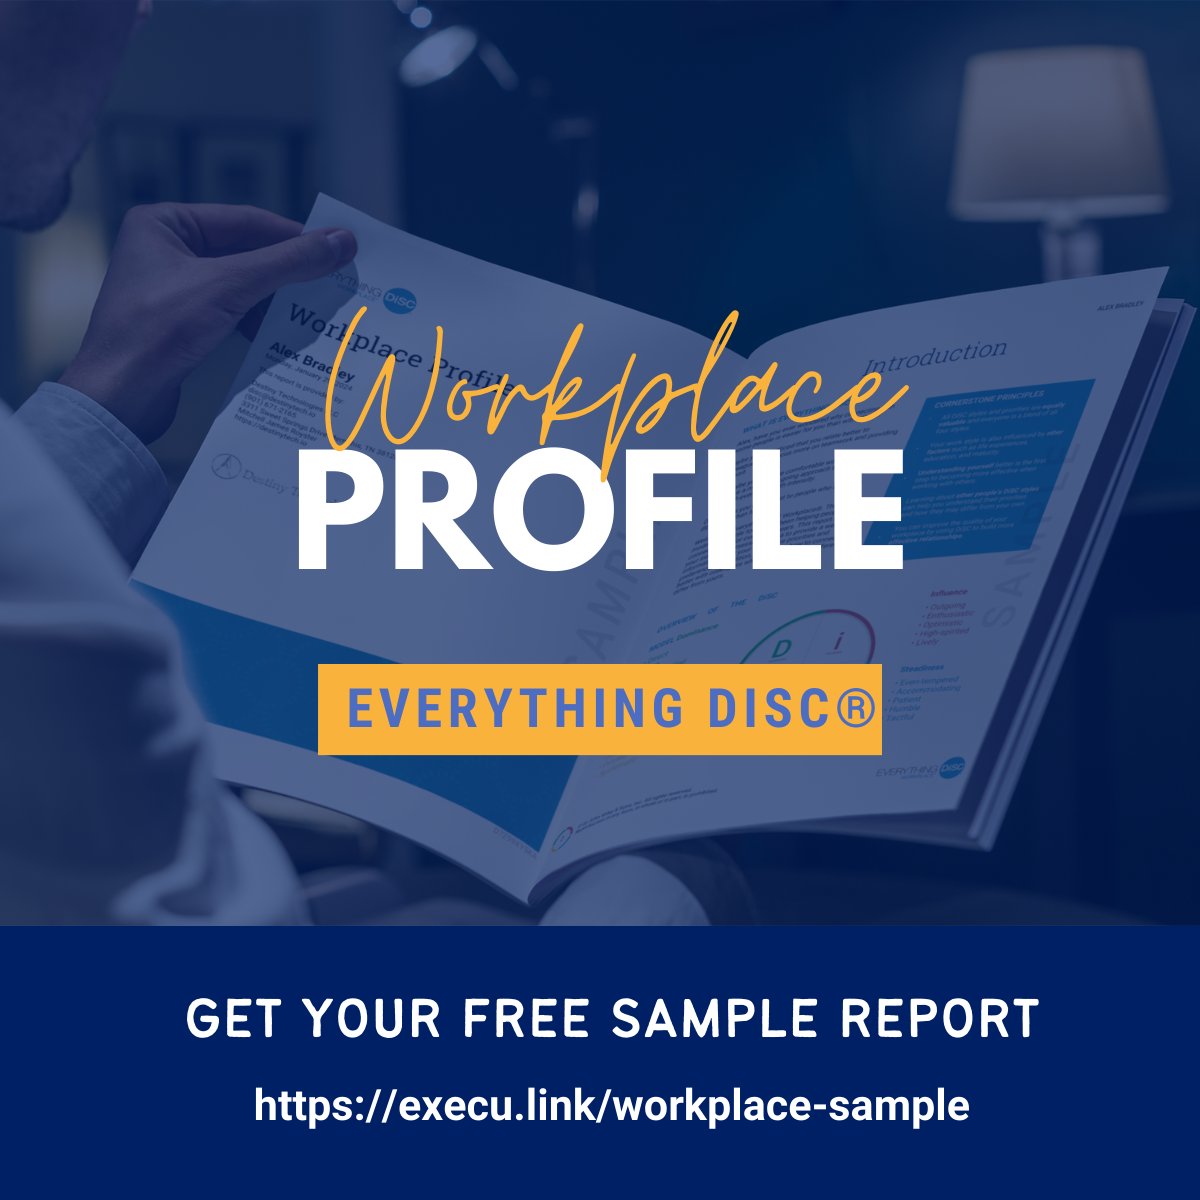 Unlock the secrets to productive relationships in your organization through a personalized assessment that unveils communication styles, motivators, and stressors.

Get your FREE Everything DiSC Sample report TODAY! 

Visit: execu.link/worplace-sample 
#EverythingDisc #Wiley